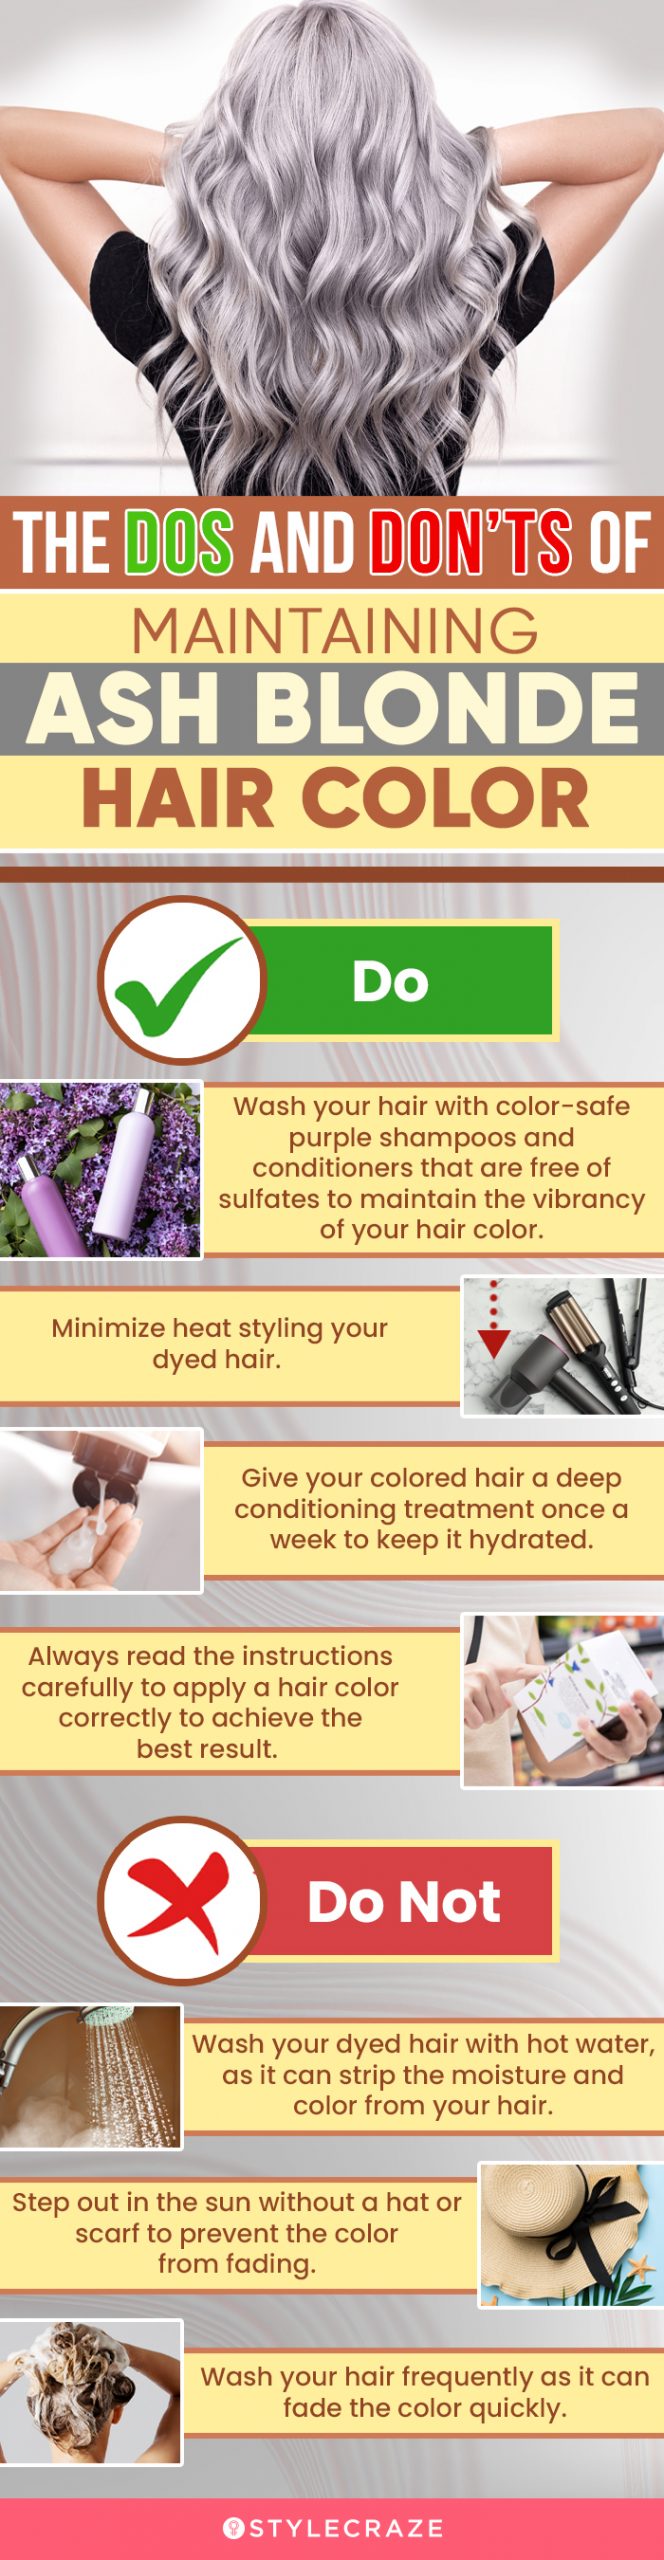 The DOs And DON’Ts Of Maintaining Ash Blonde Hair Color (infographic)